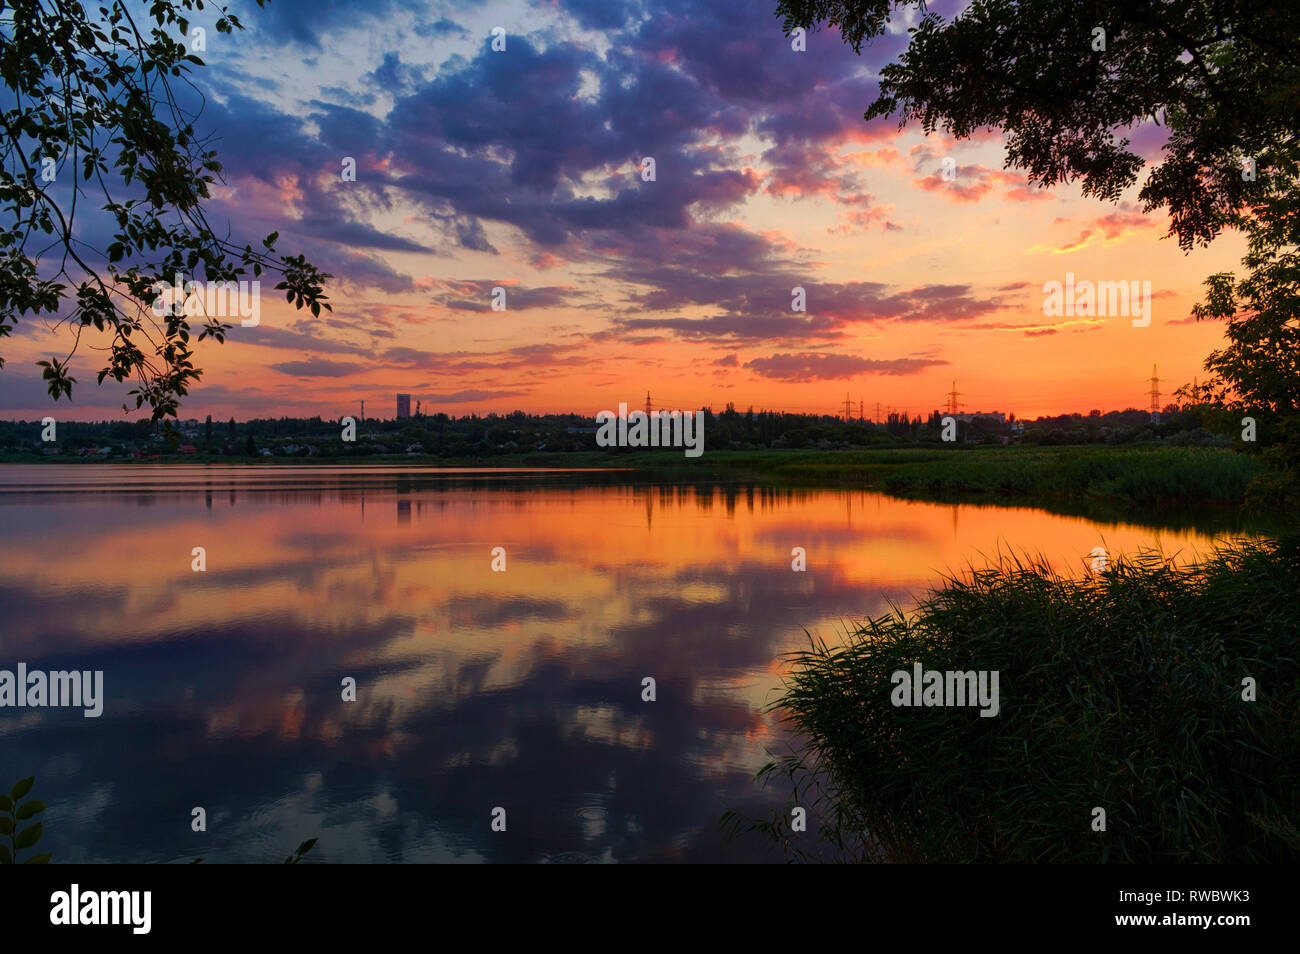 Awesome summer landscape of sunset reflected by water in Krivoy Rog, Ukraine. A beautiful sunset sky background. Colorful sunset clouds. Stock Photo